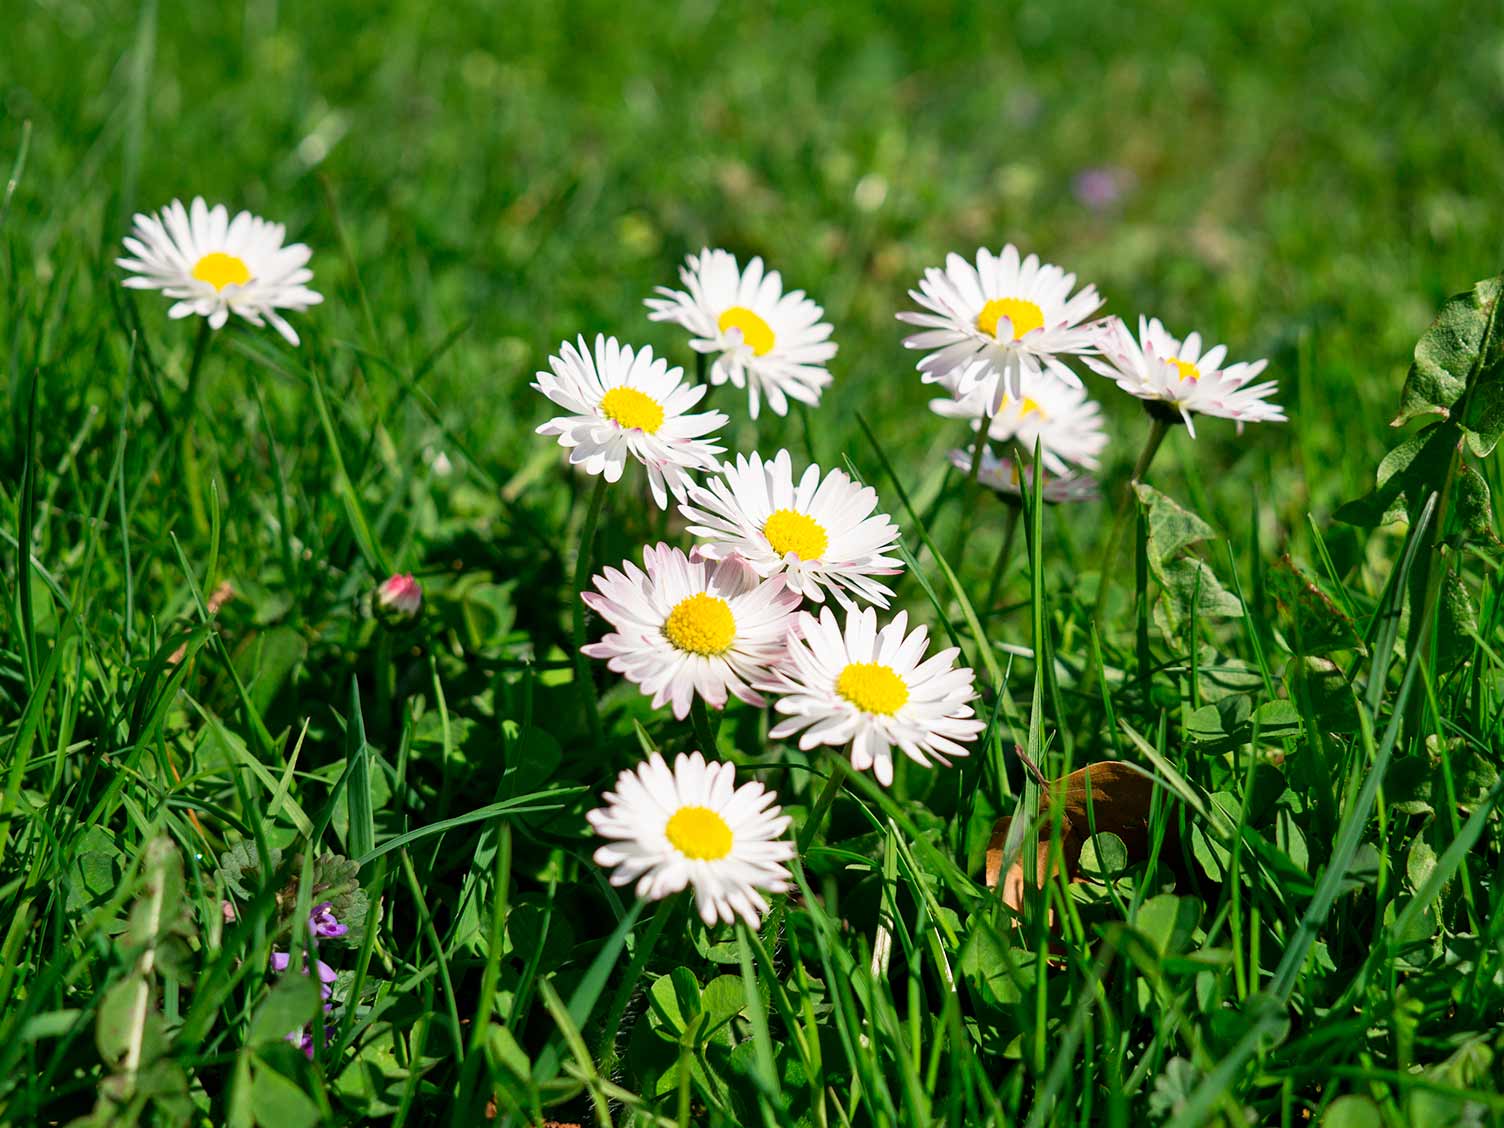 Daisy weeds in lawn